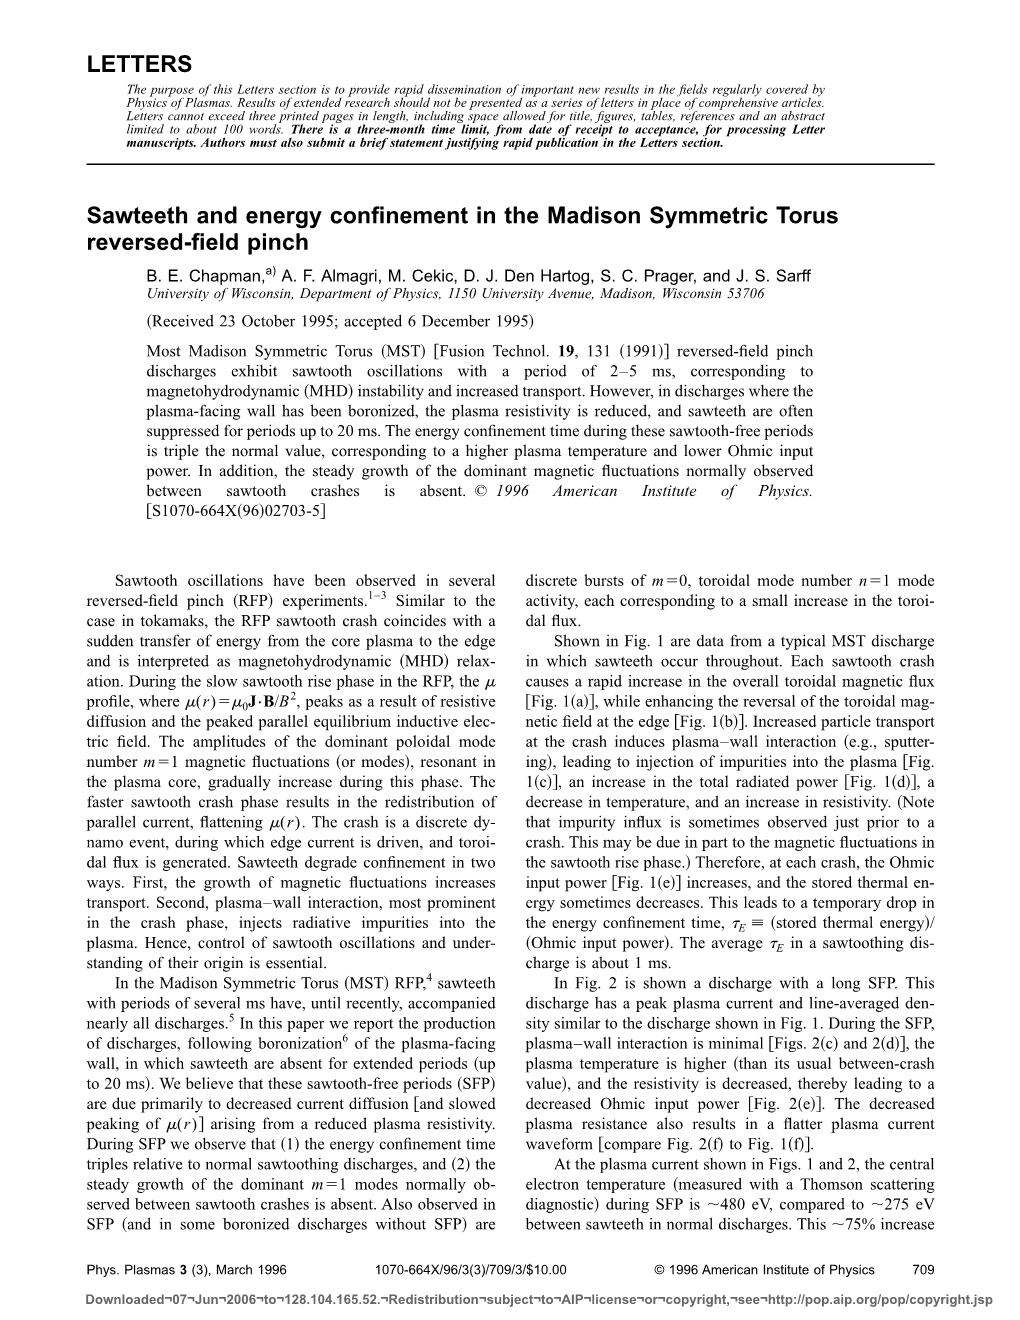 Sawteeth and Energy Confinement in the Madison Symmetric Torus